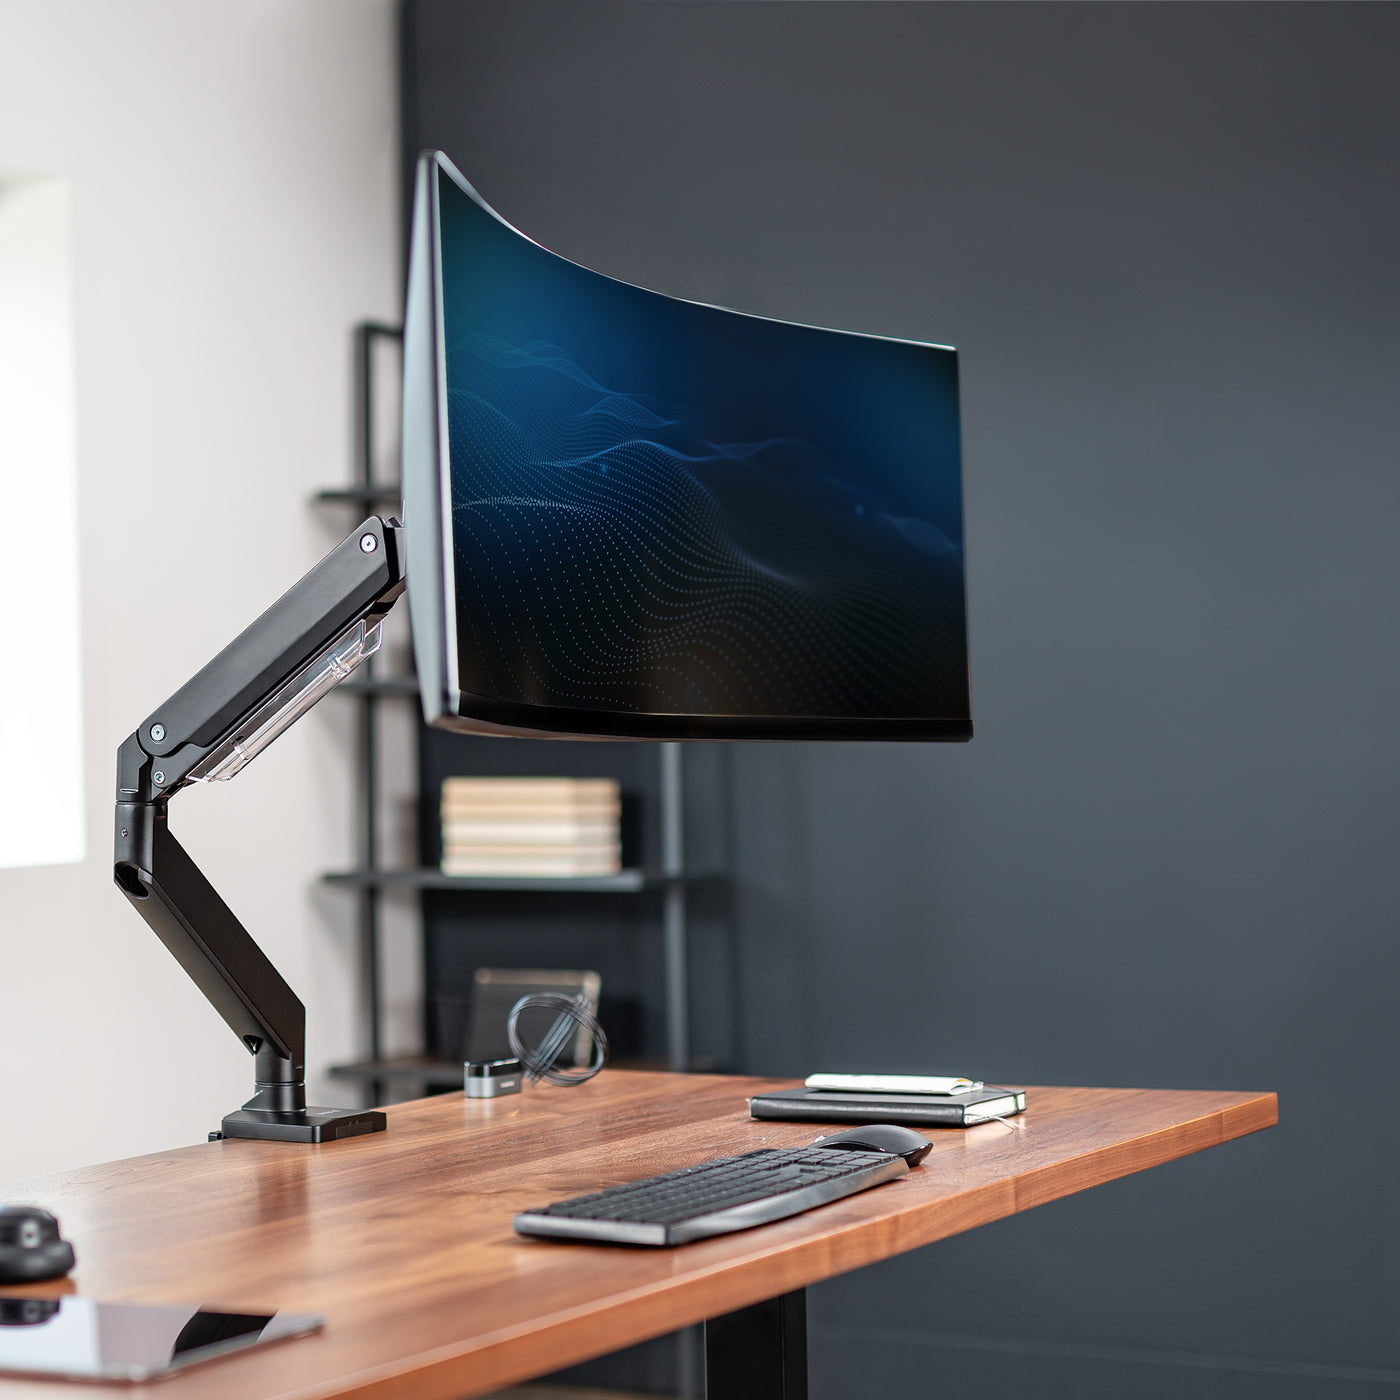 Sturdy arm clamped onto a desk supporting a curved monitor in an aesthetic office.